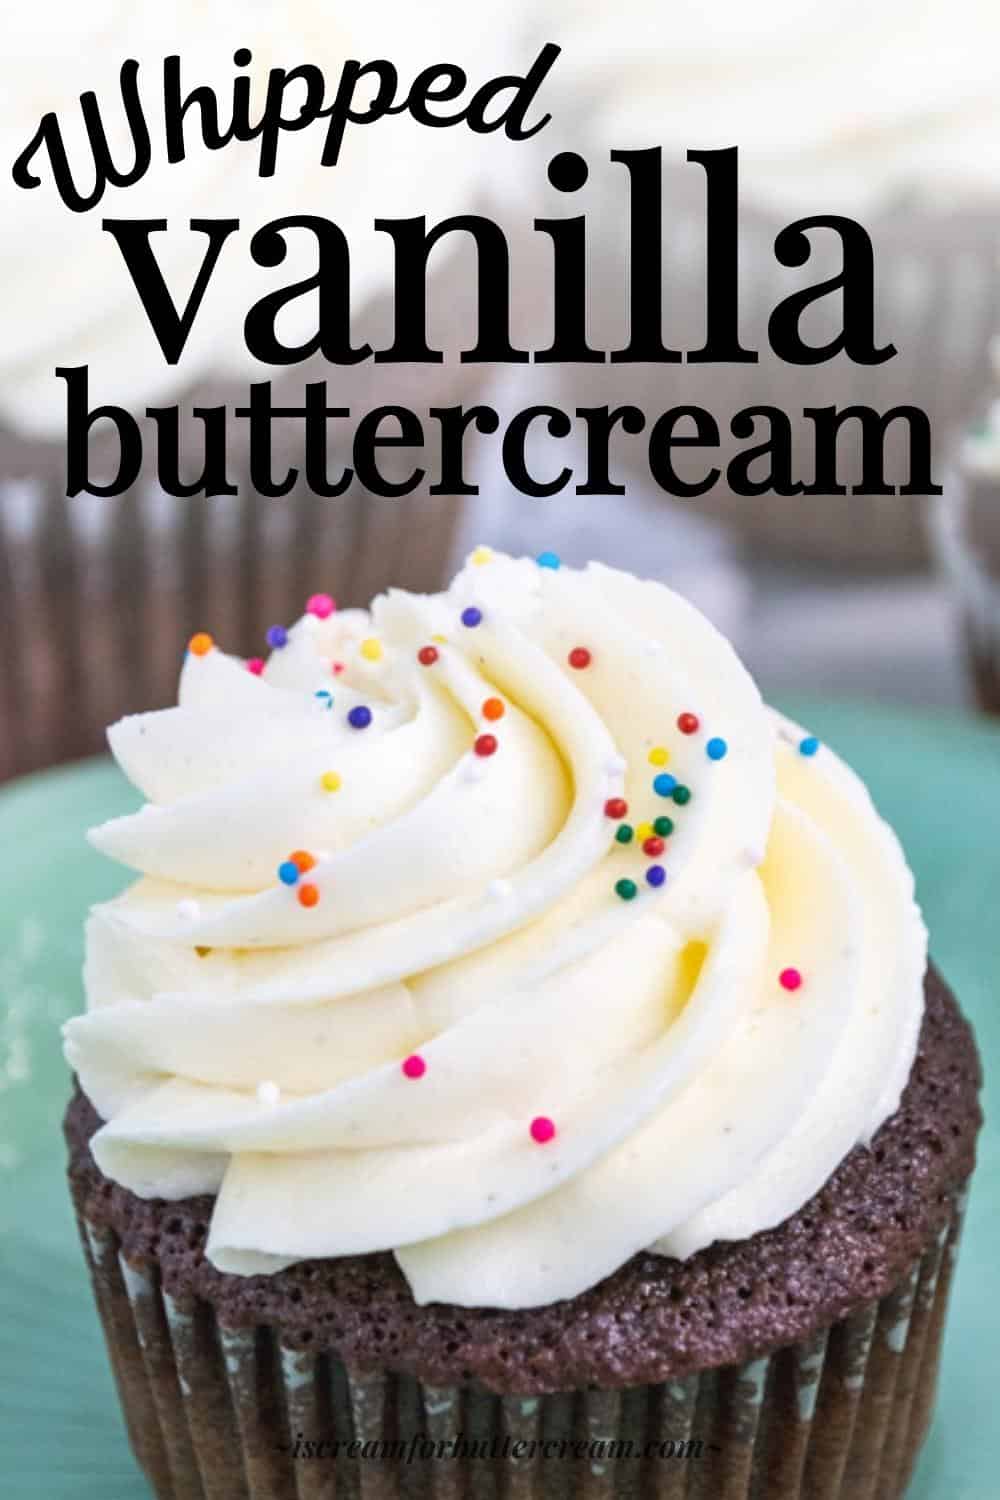 Pinterest image of close up of whipped vanilla frosting on top of a chocolate cupcake with text overlay.